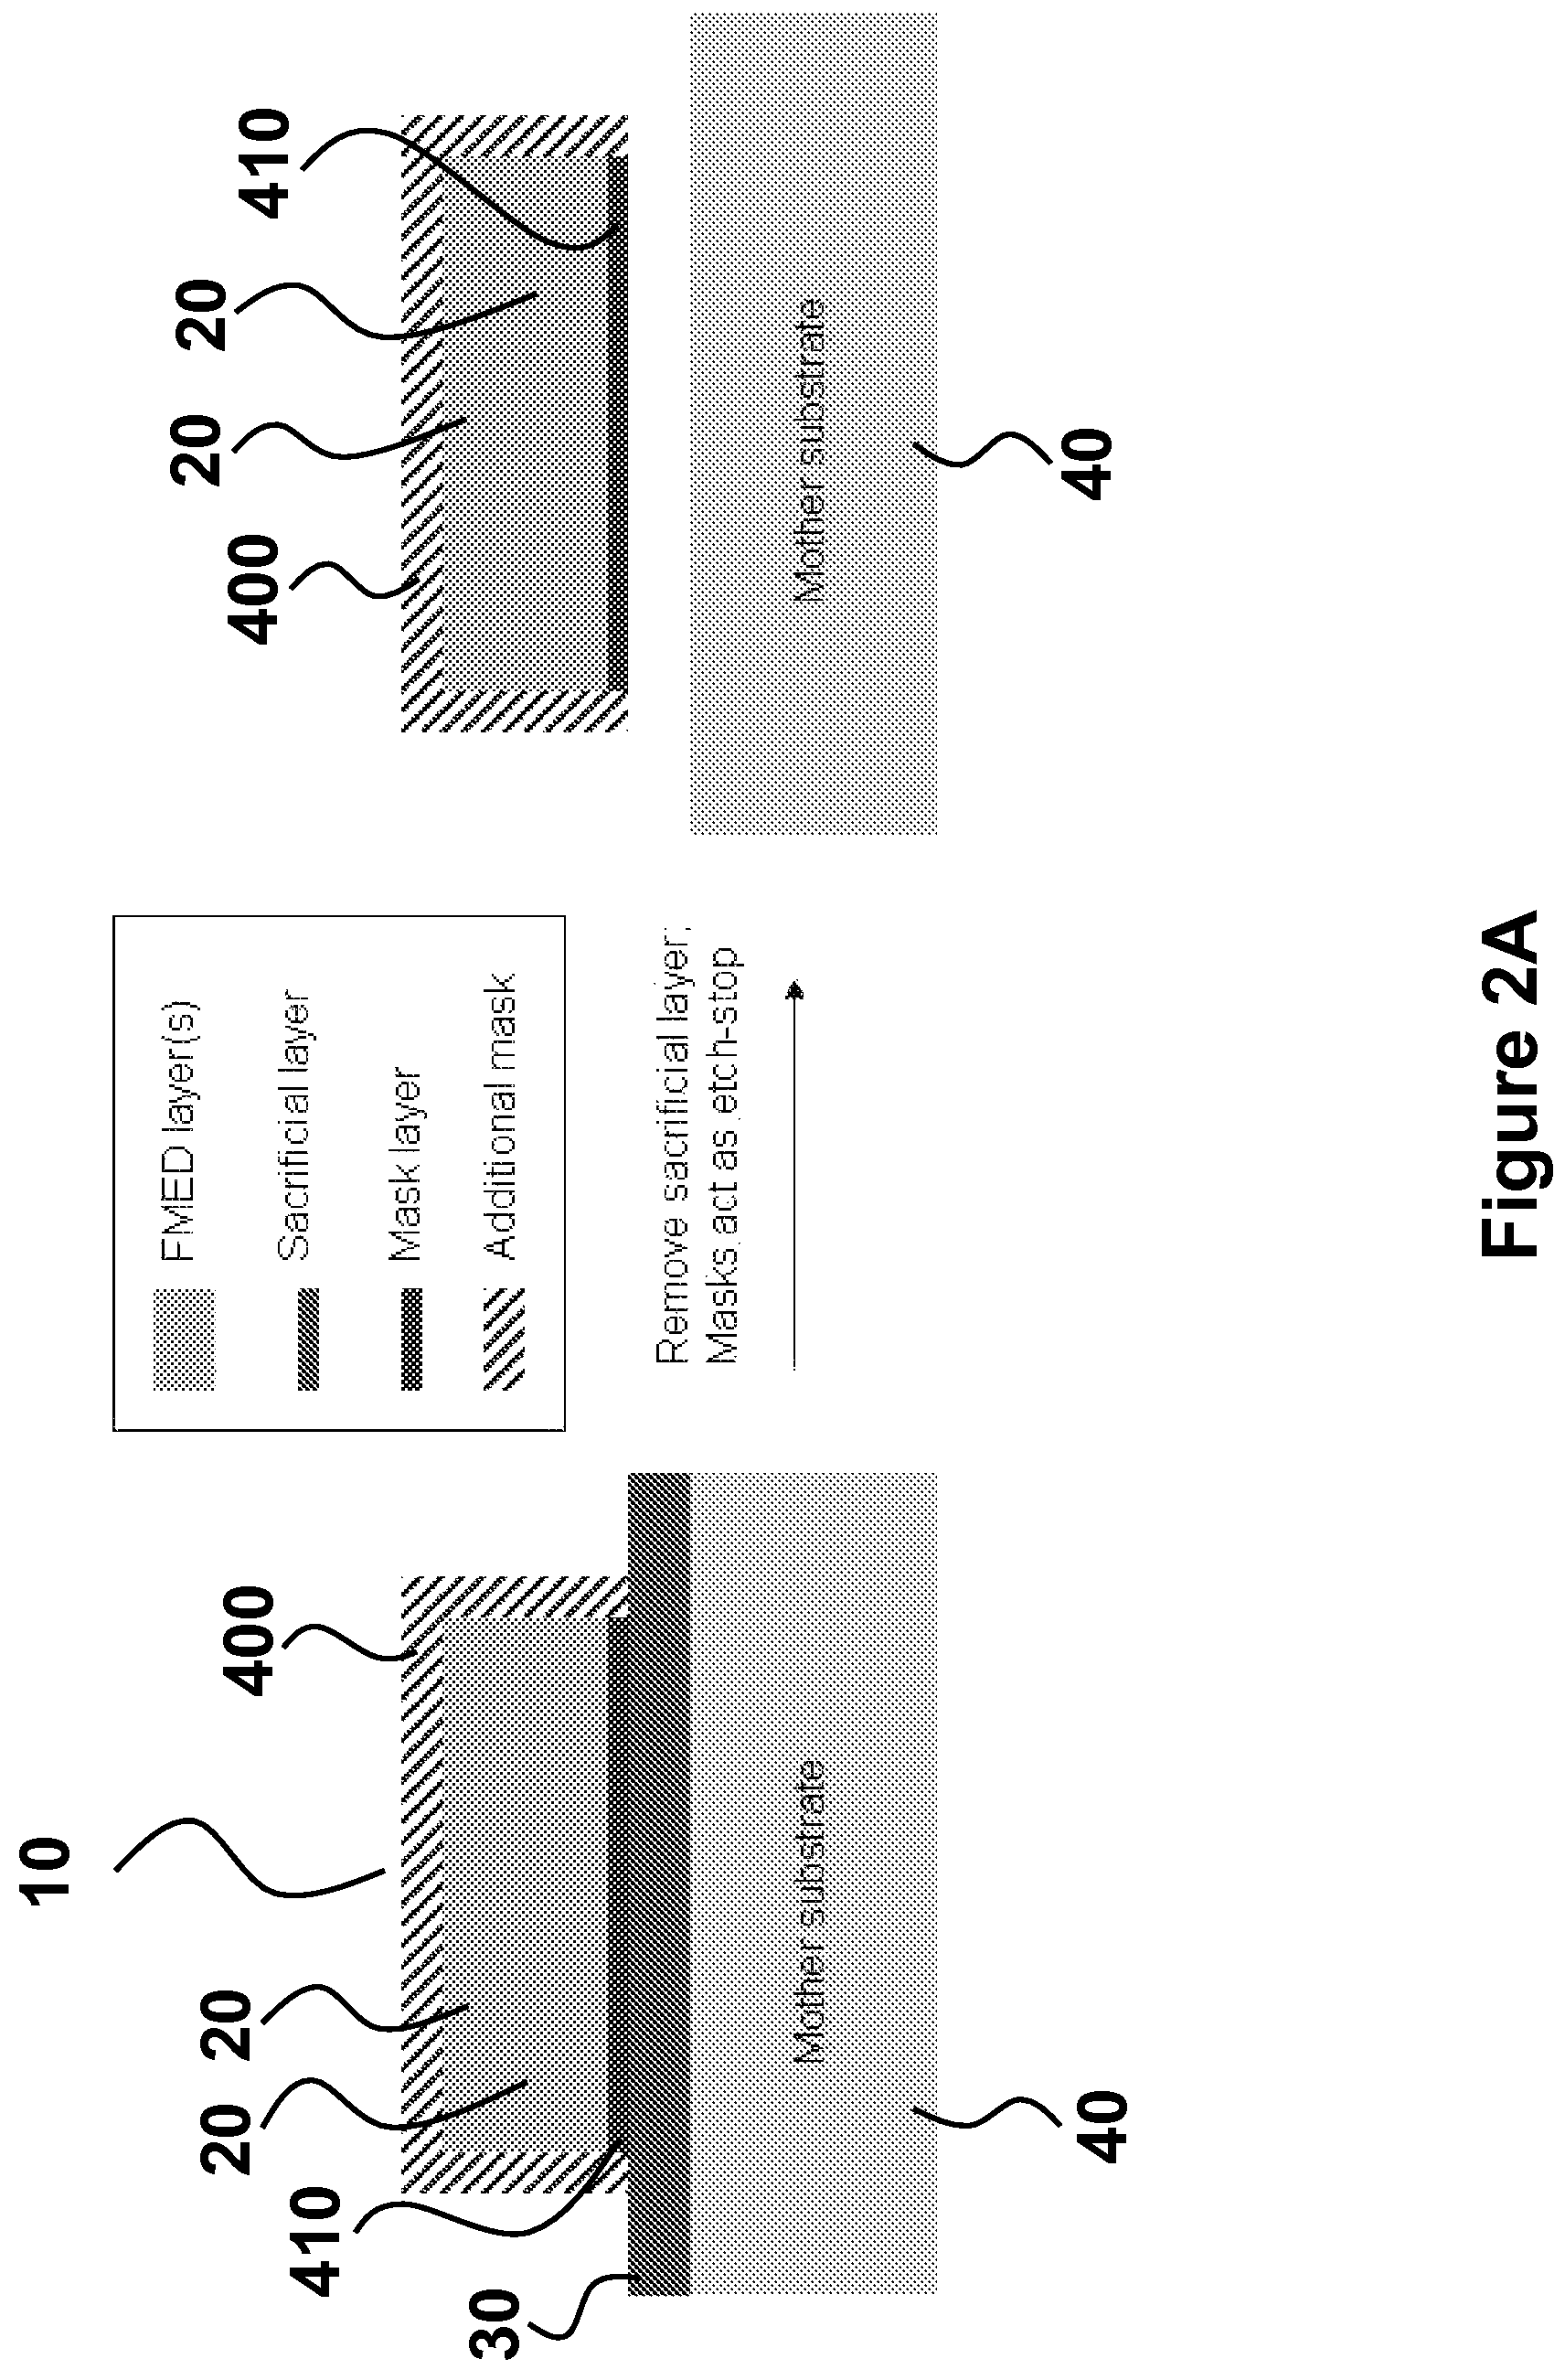 Release strategies for making transferable semiconductor structures, devices and device components